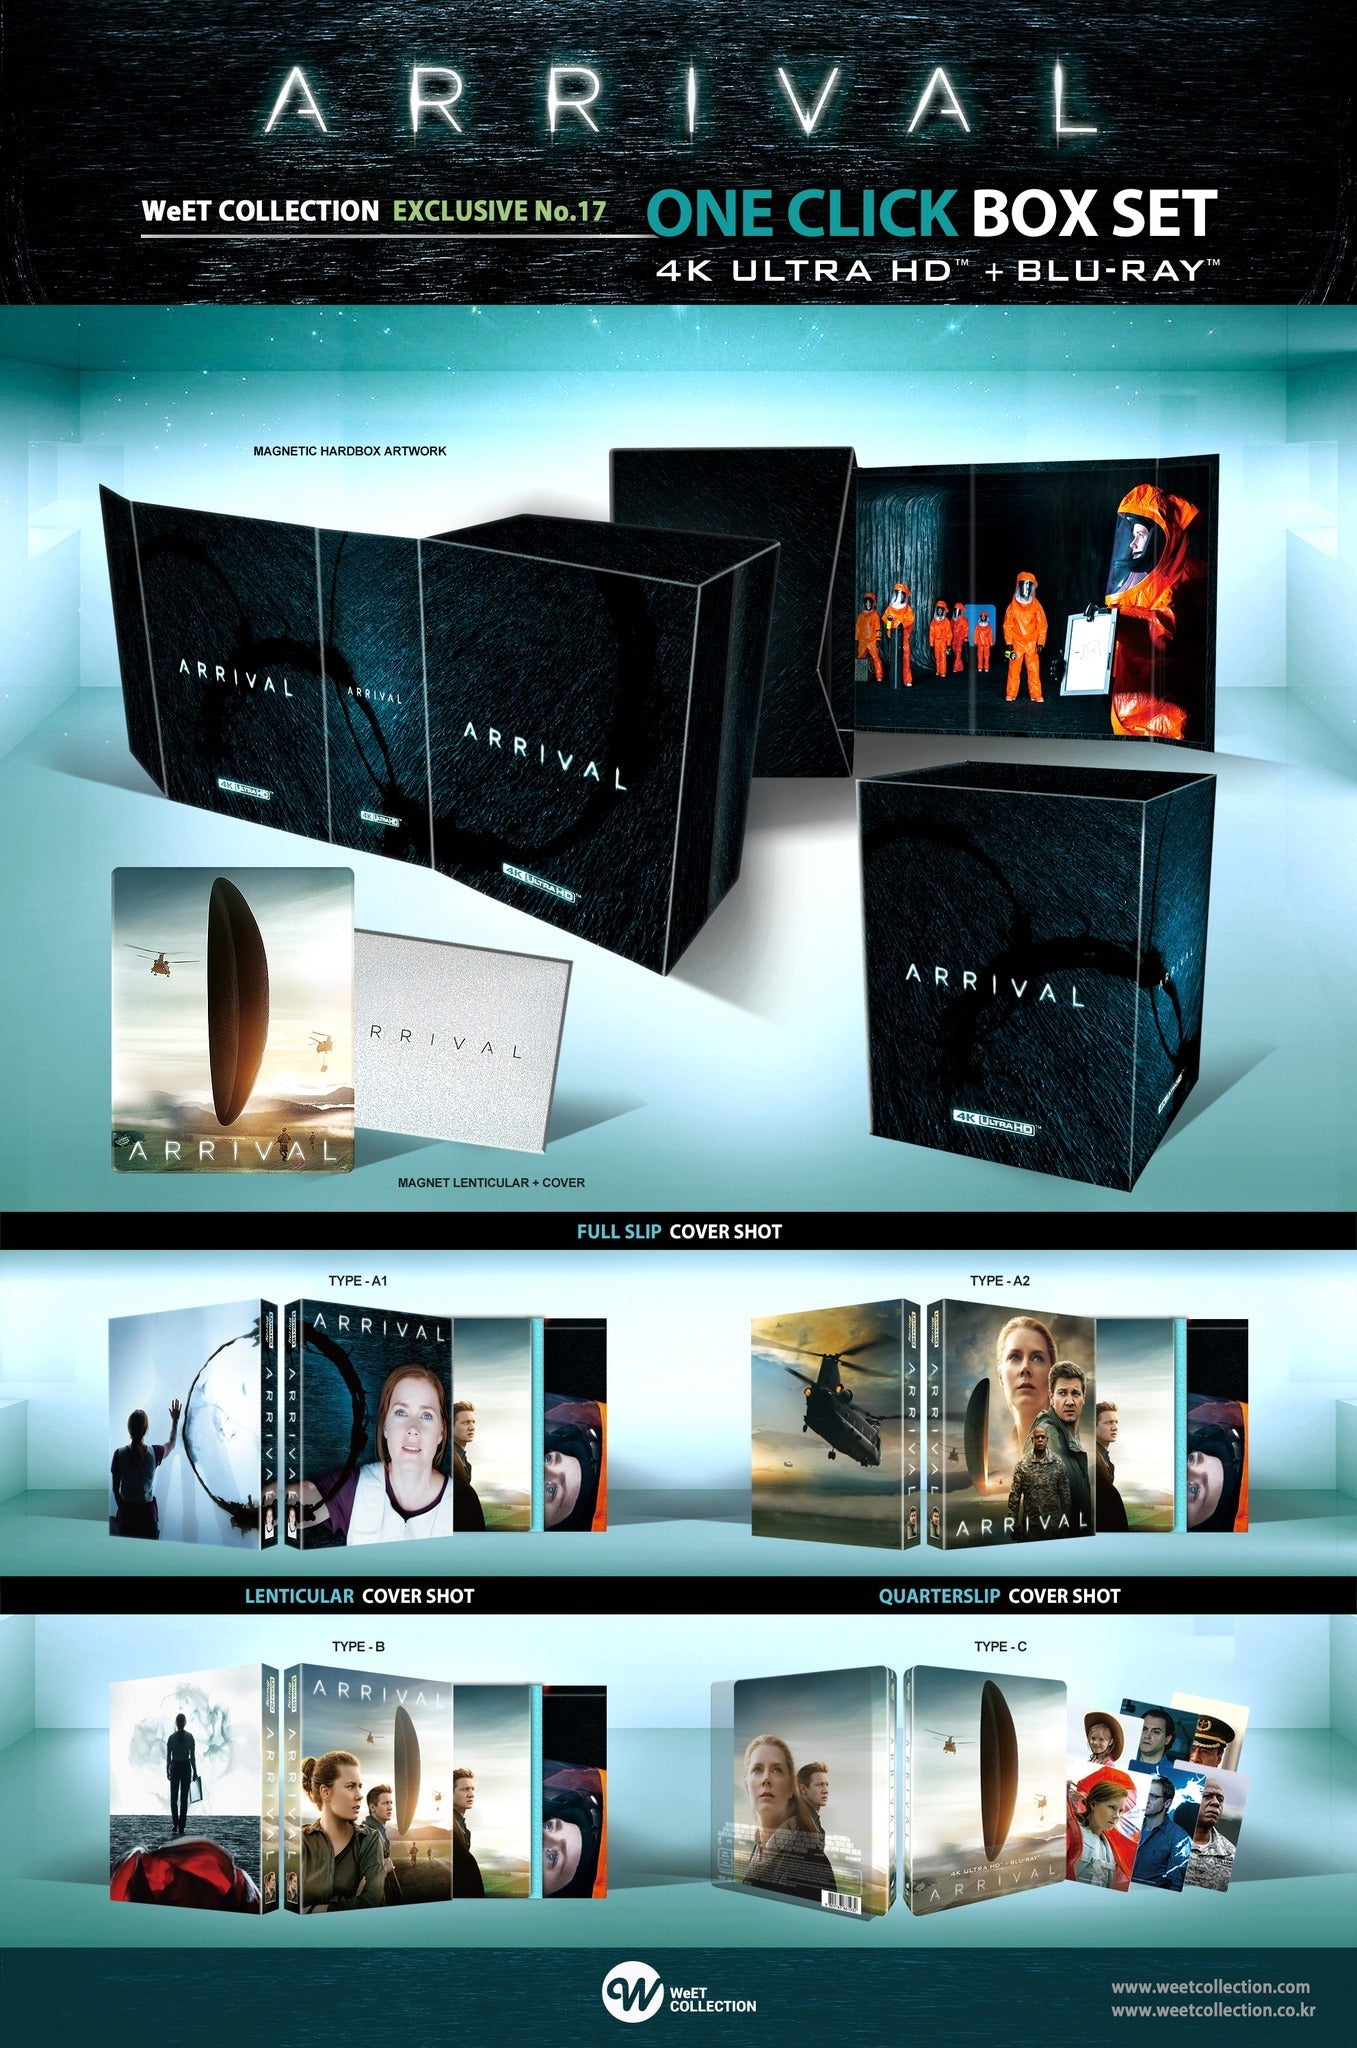 Arrival 4K Blu-ray Steelbook WeET Collection Exclusive #17 One Click Box Set